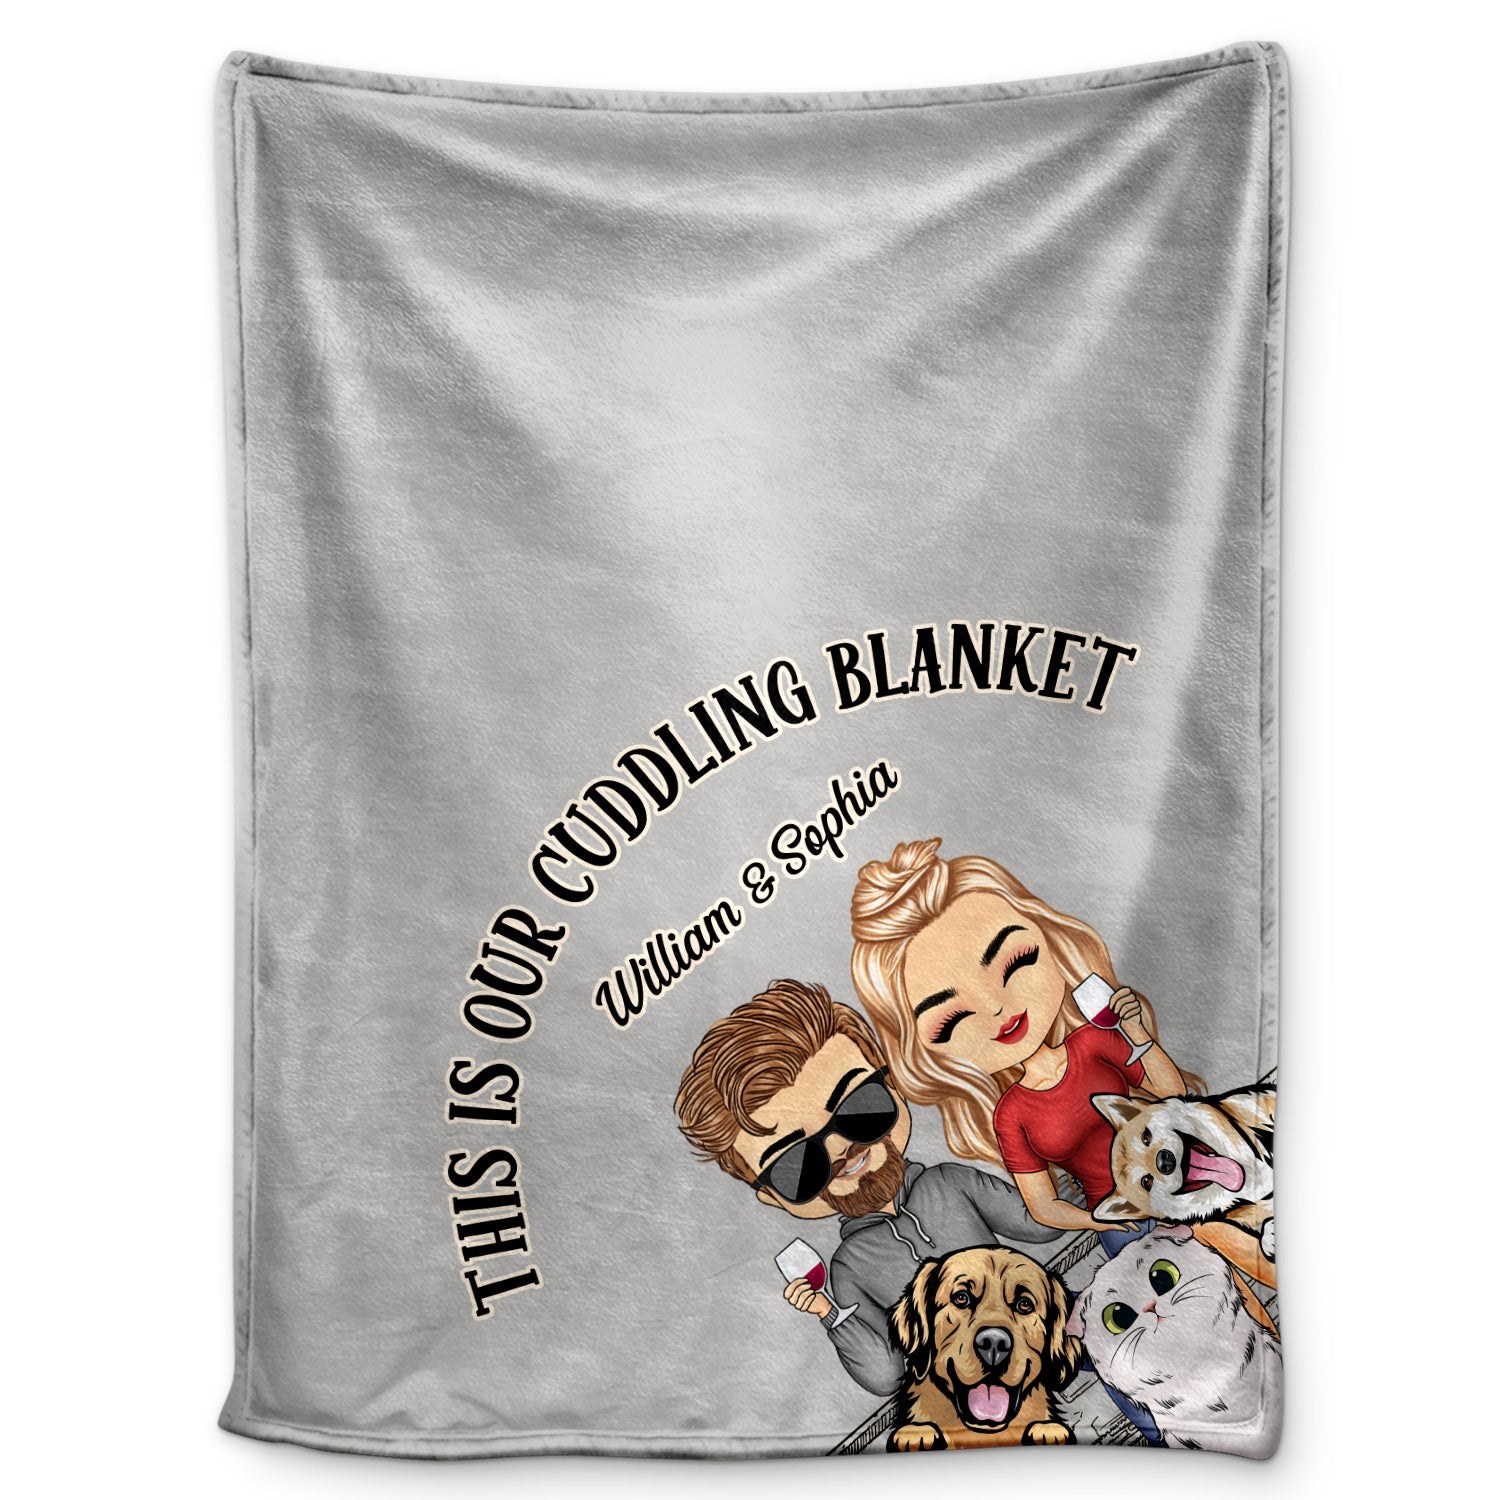 This Is Our Cuddling Blanket Couples Cats Dogs - Anniversary, Birthday Gift For Spouse, Husband, Wife, Boyfriend, Girlfriend - Personalized Custom Fleece Blanket